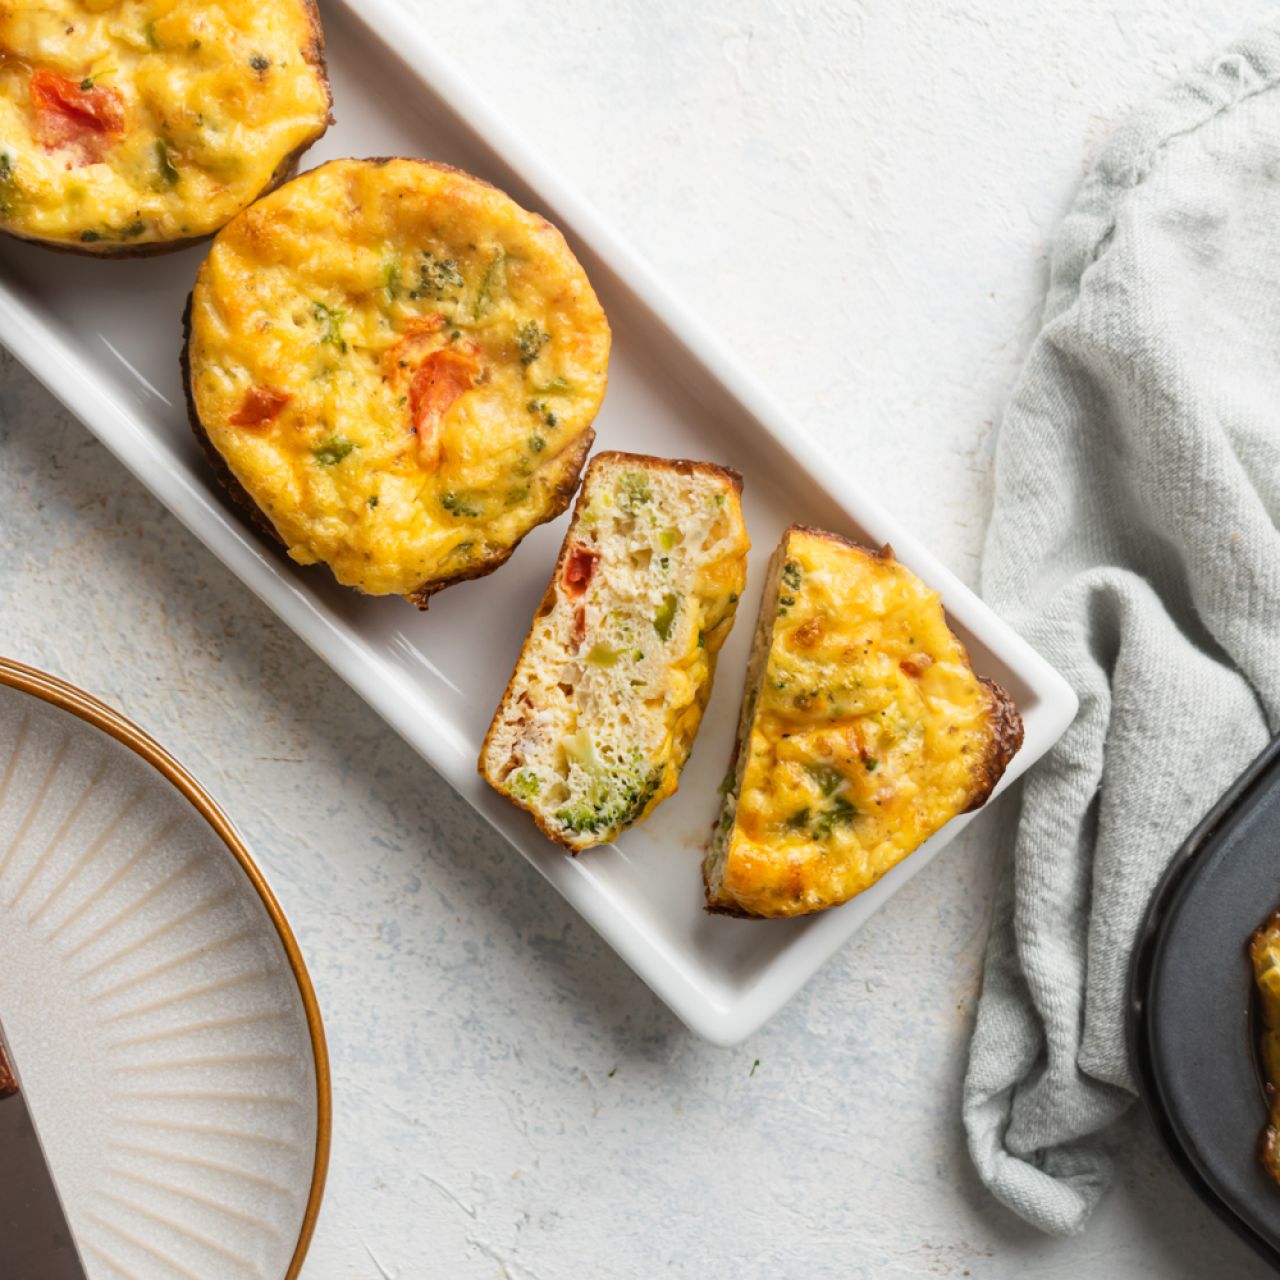 https://www.slenderkitchen.com/sites/default/files/styles/gsd-1x1/public/recipe_images/cottage-cheese-egg-muffins.jpg